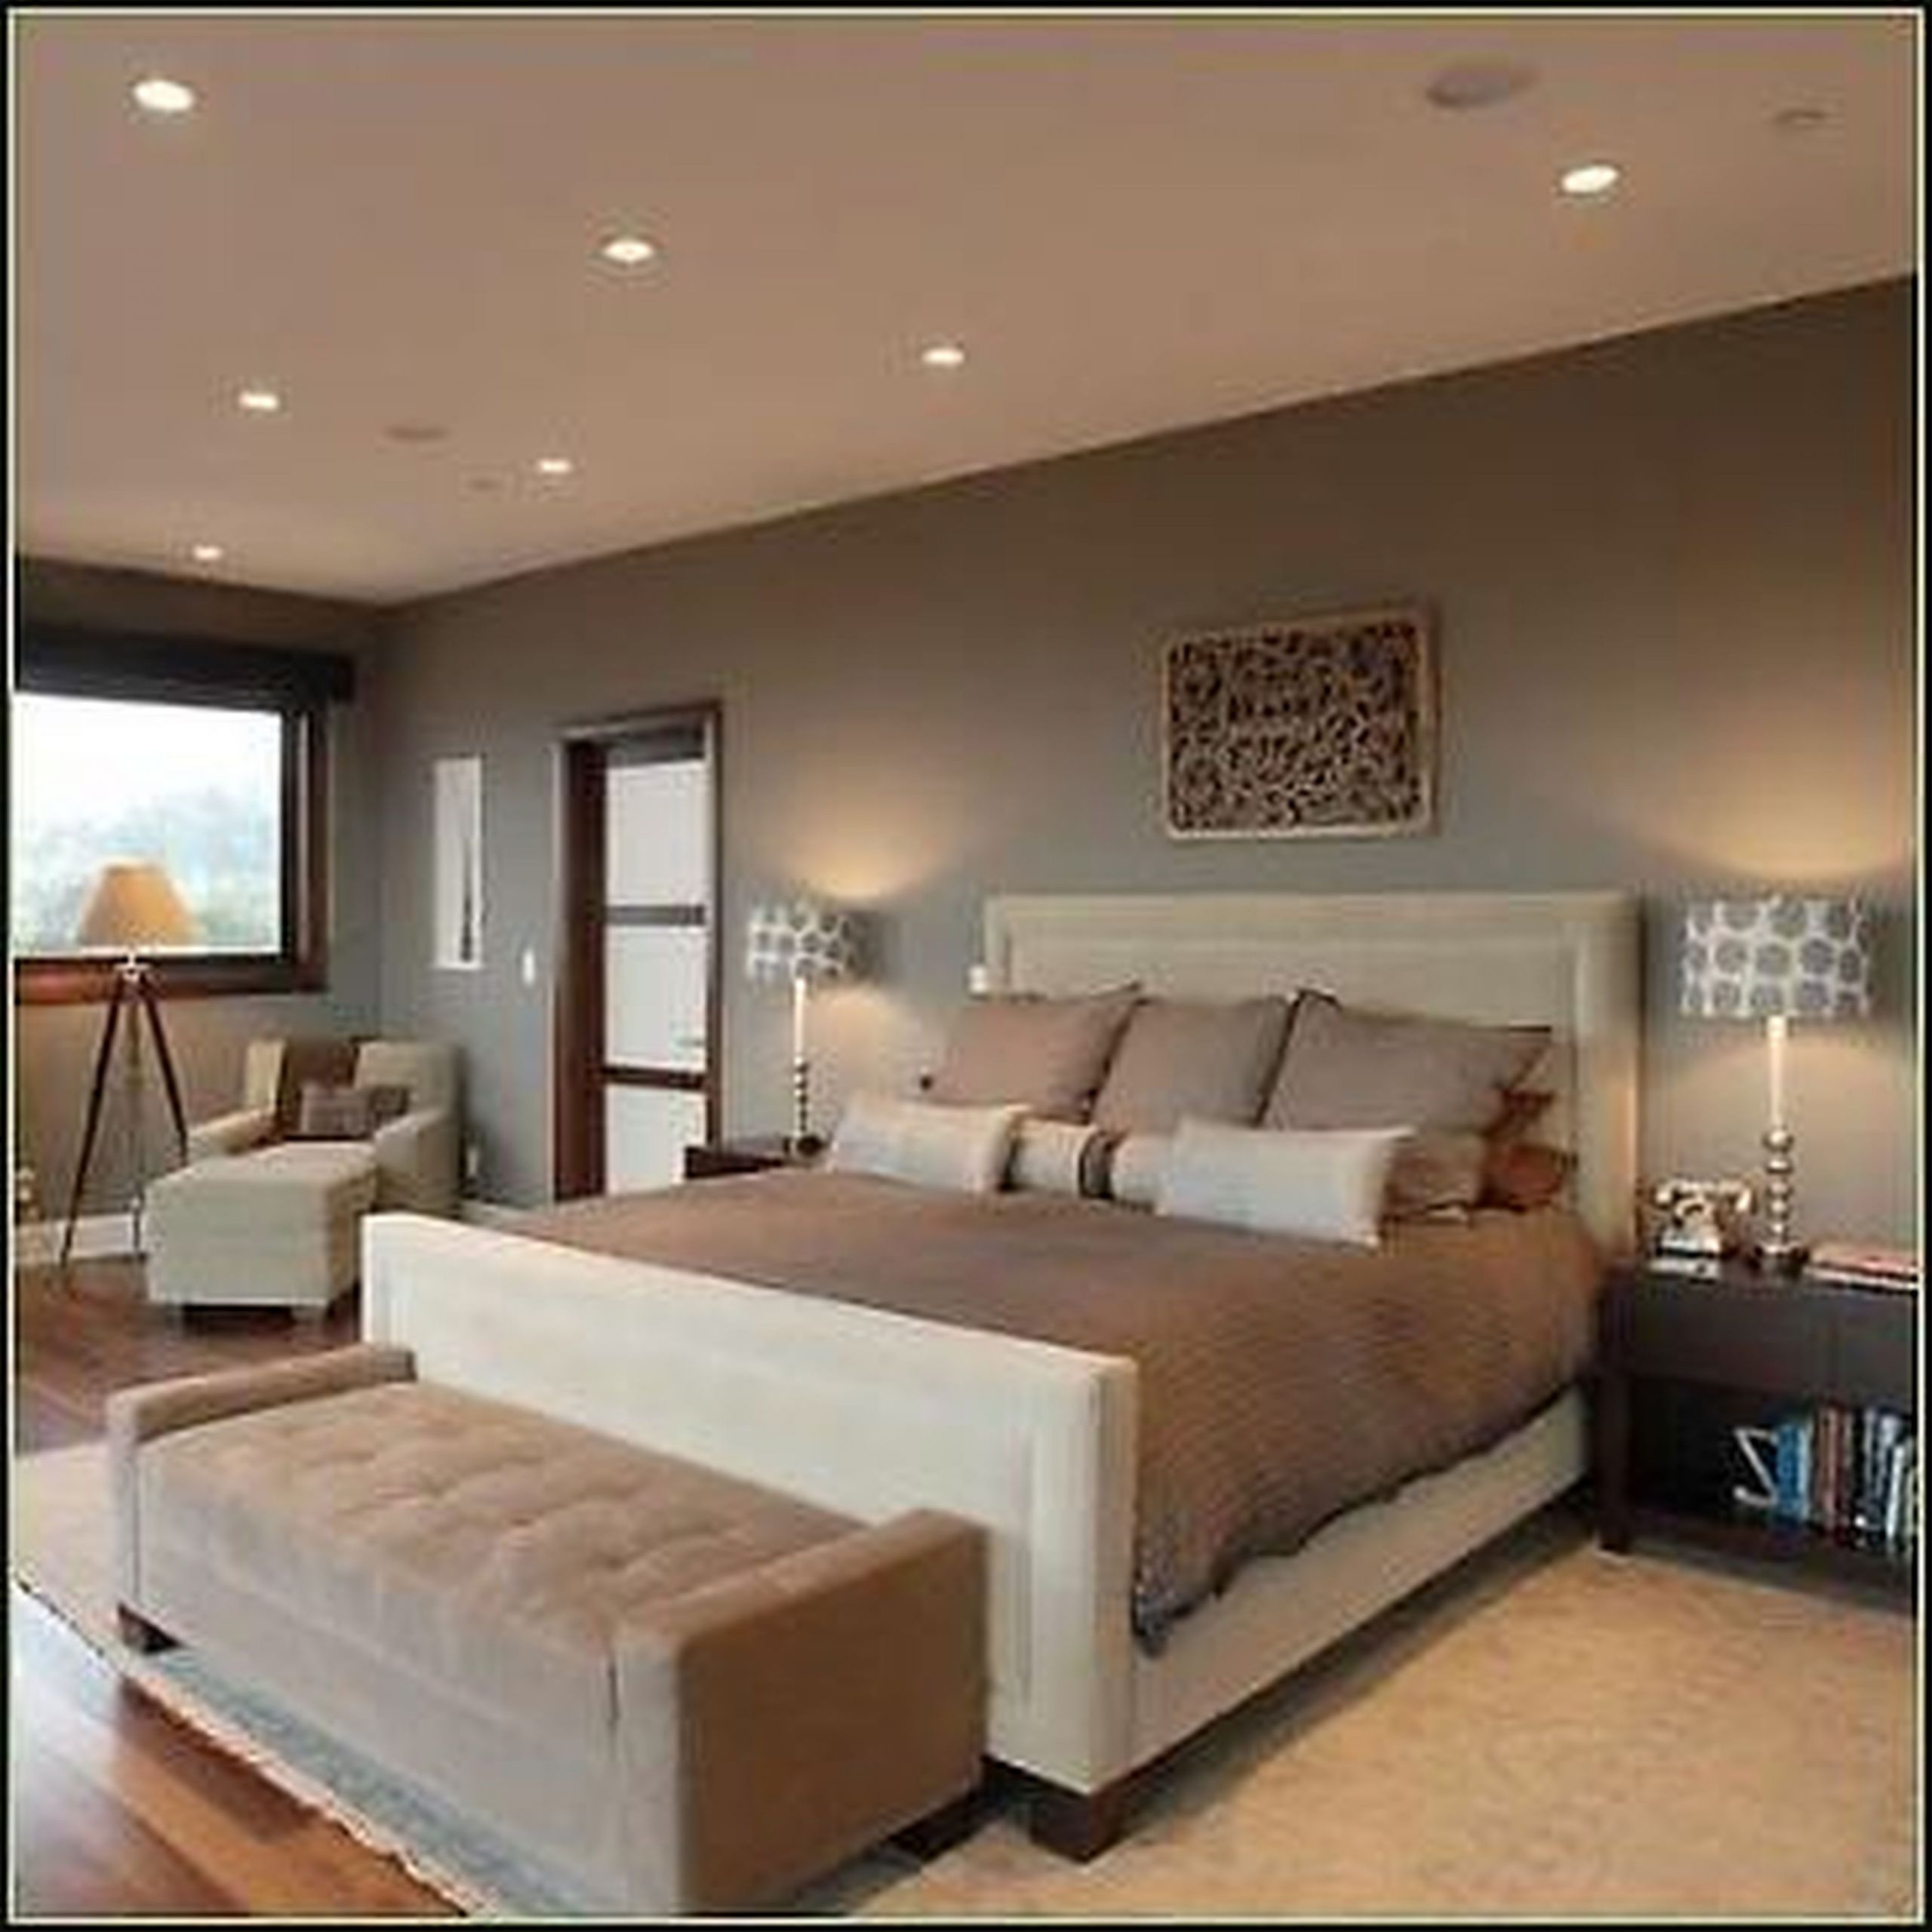 Cool Paint Ideas For Bedroom
 Engaging Cool Wall Paint Designs Beautiful Grey Wood